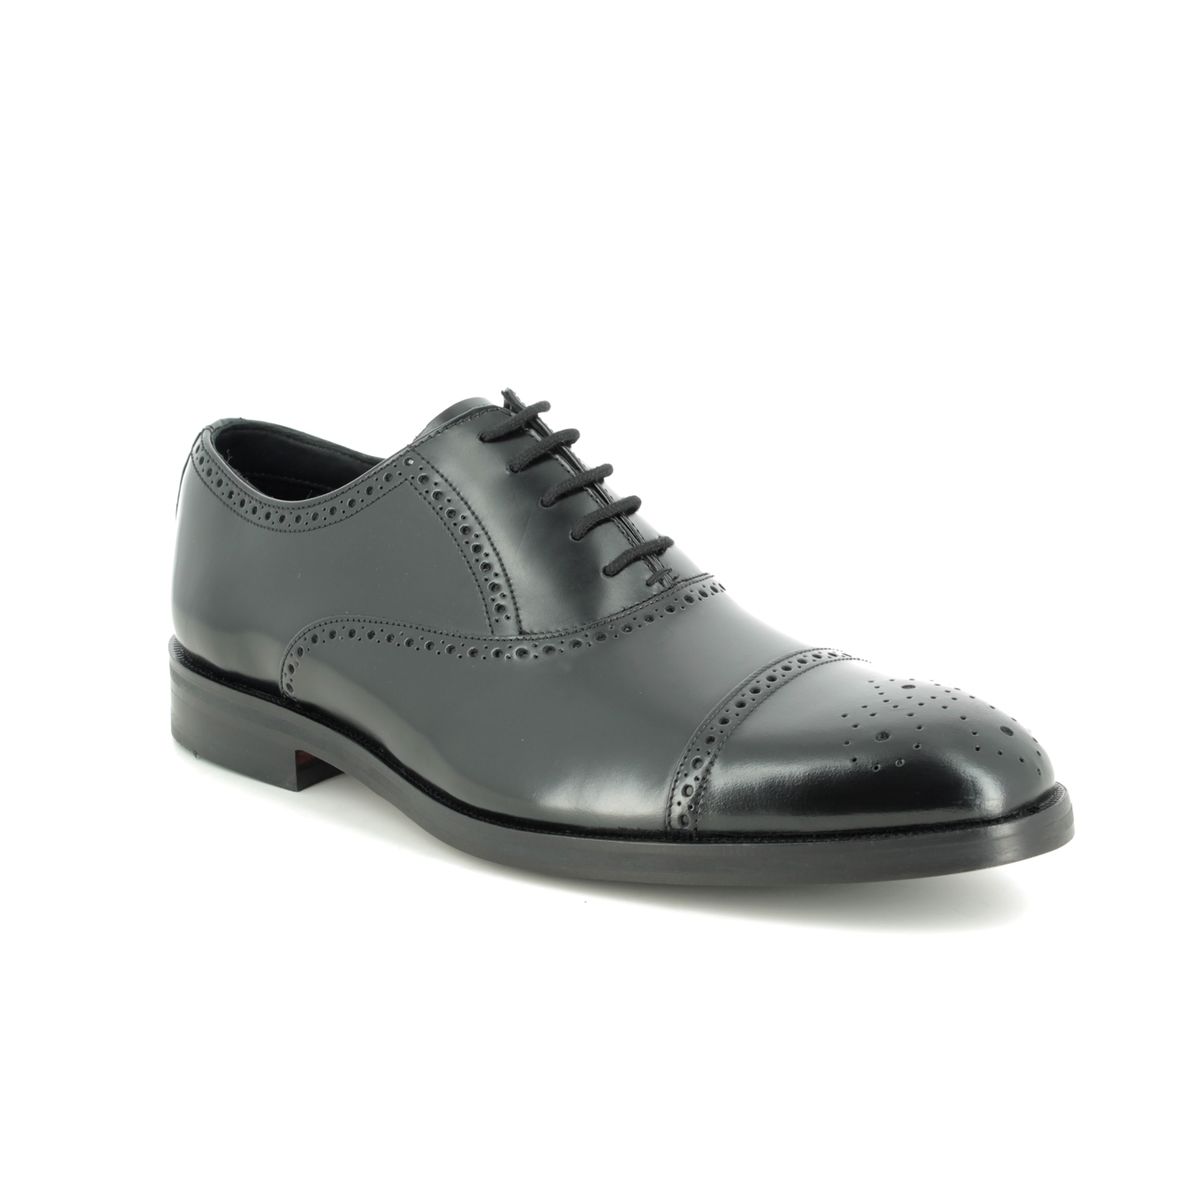 Clarks Oliver Limit Black leather Mens Brogues 4364-67G in a Plain Leather in Size 11